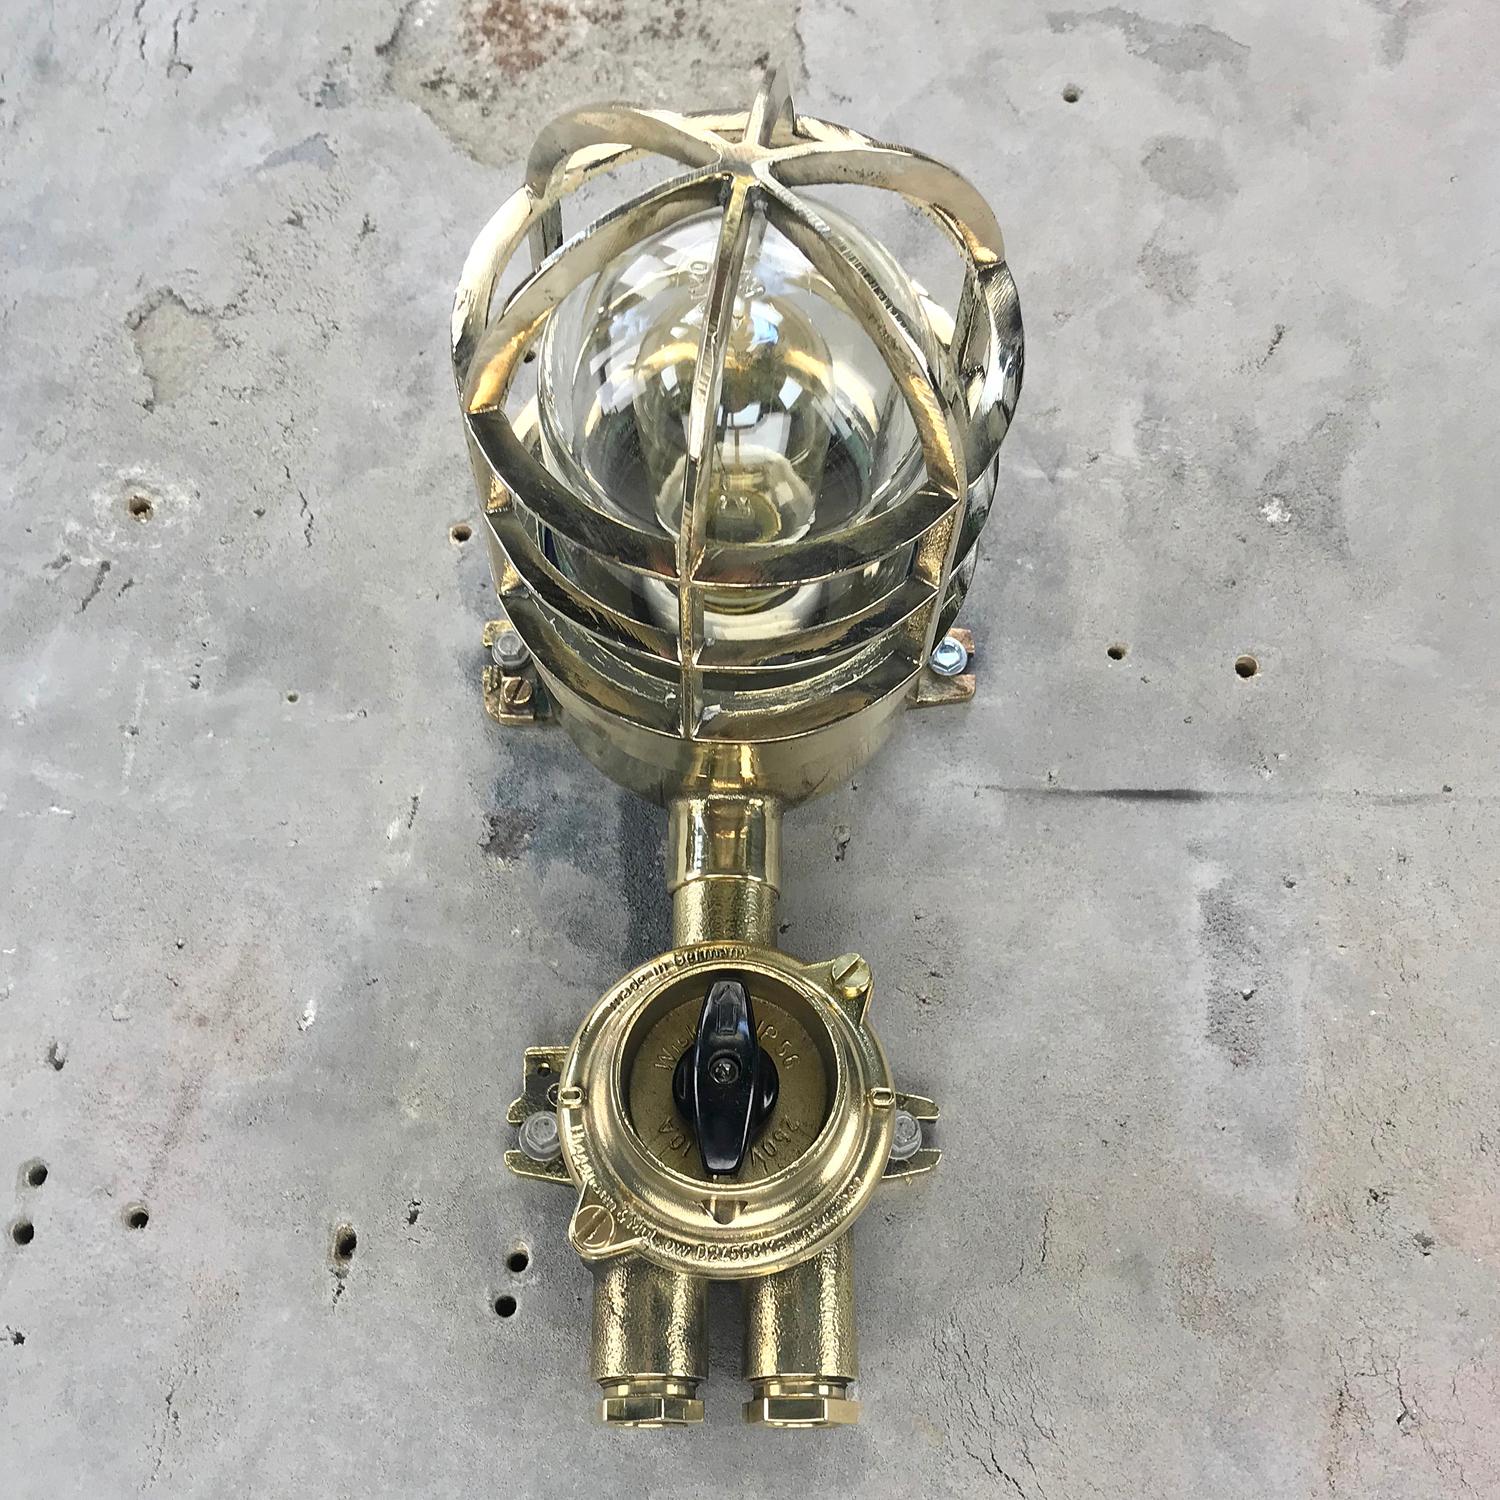 1970s German Explosion Proof Wall Light Cast Brass, Glass Shade & Rotary Switch For Sale 11